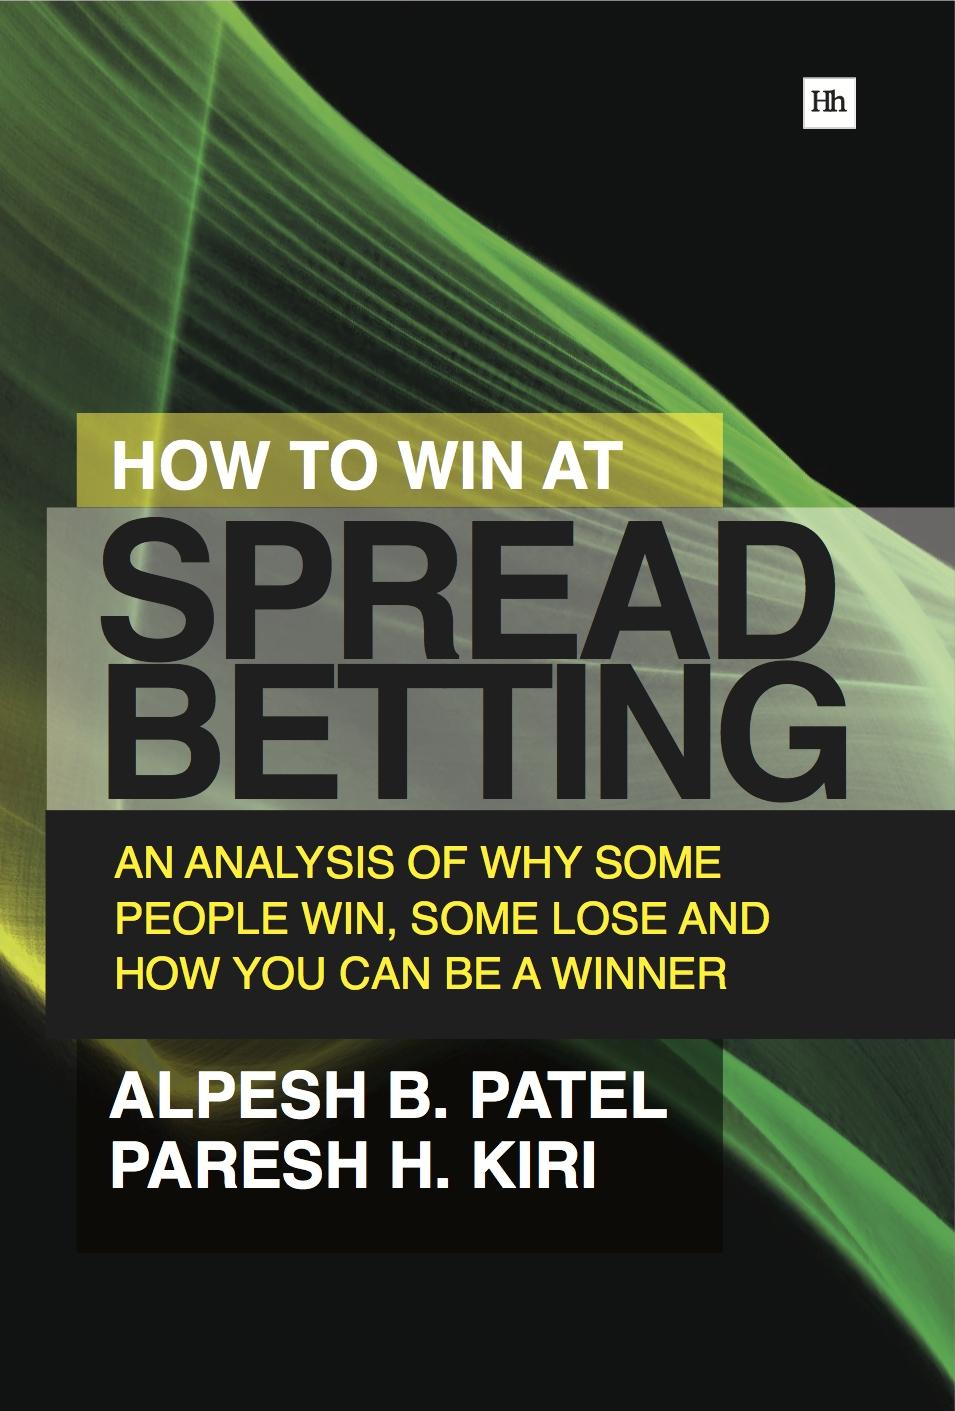 How to win in a Spread Betting "An analysis of why some people win, some lose and how you can b"